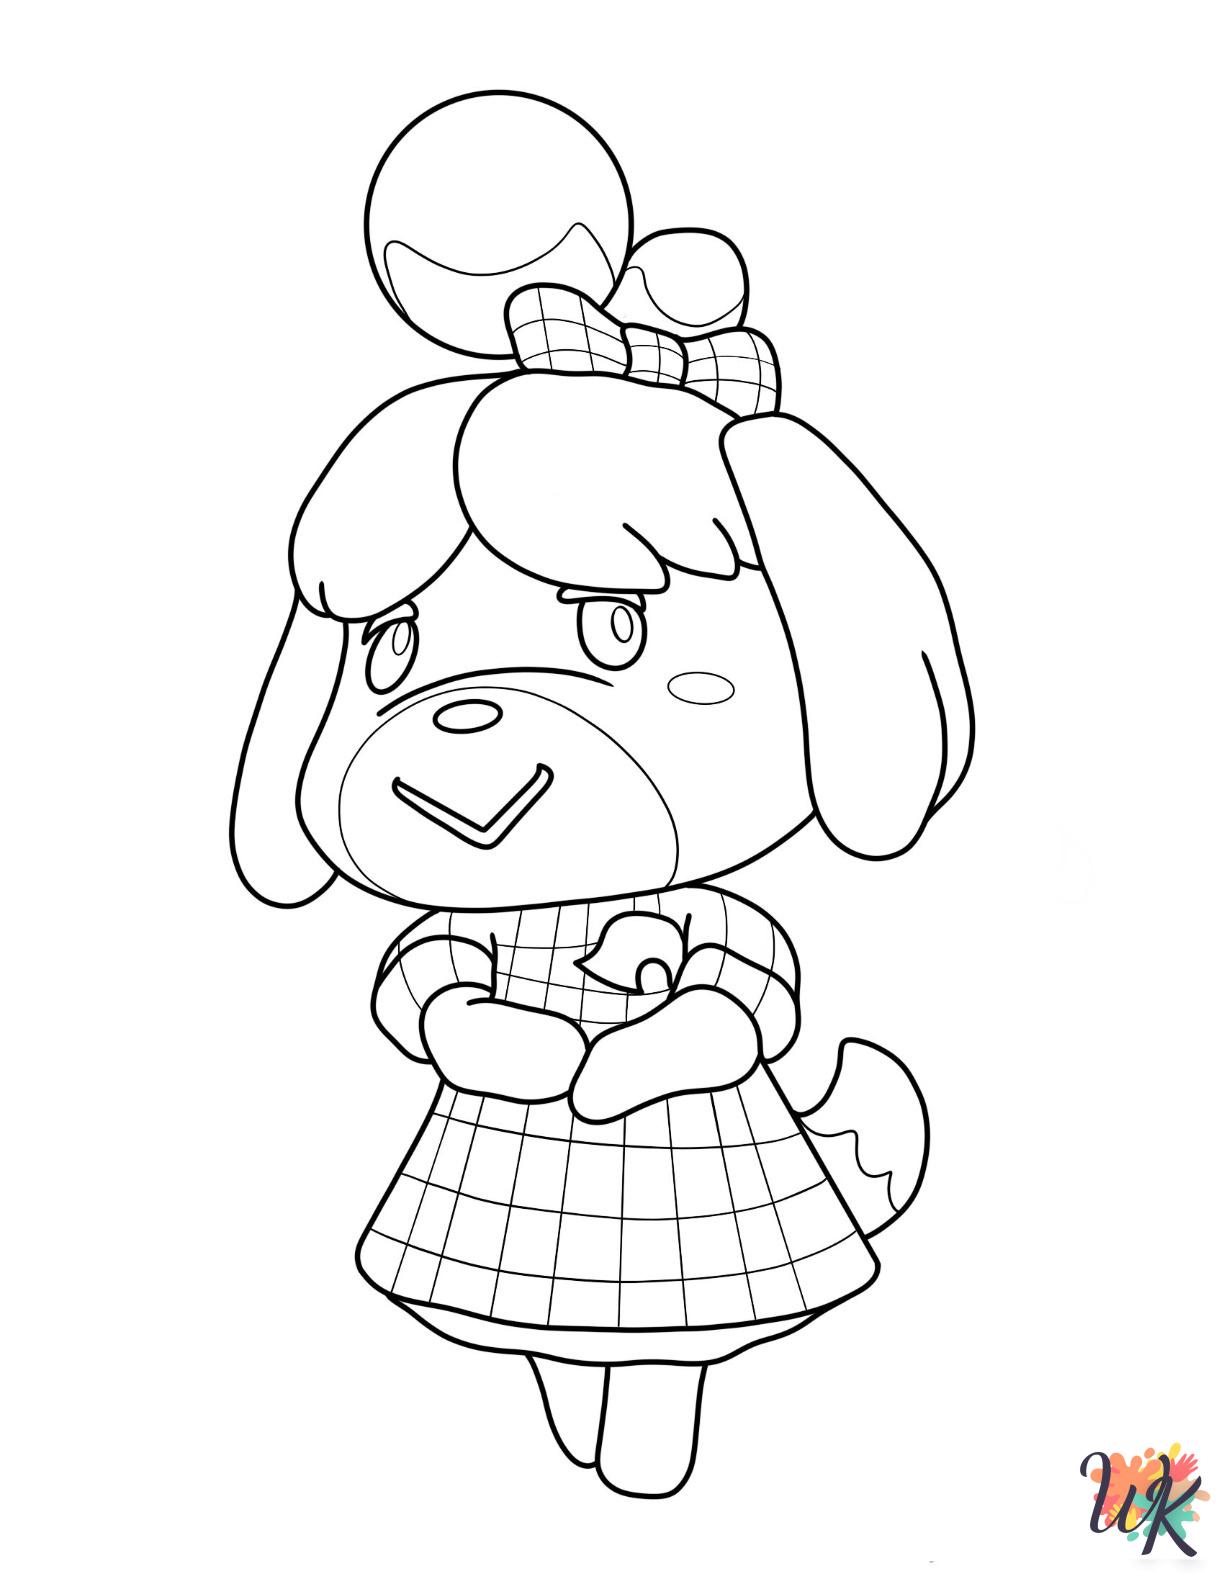 old-fashioned Animal Crossing coloring pages